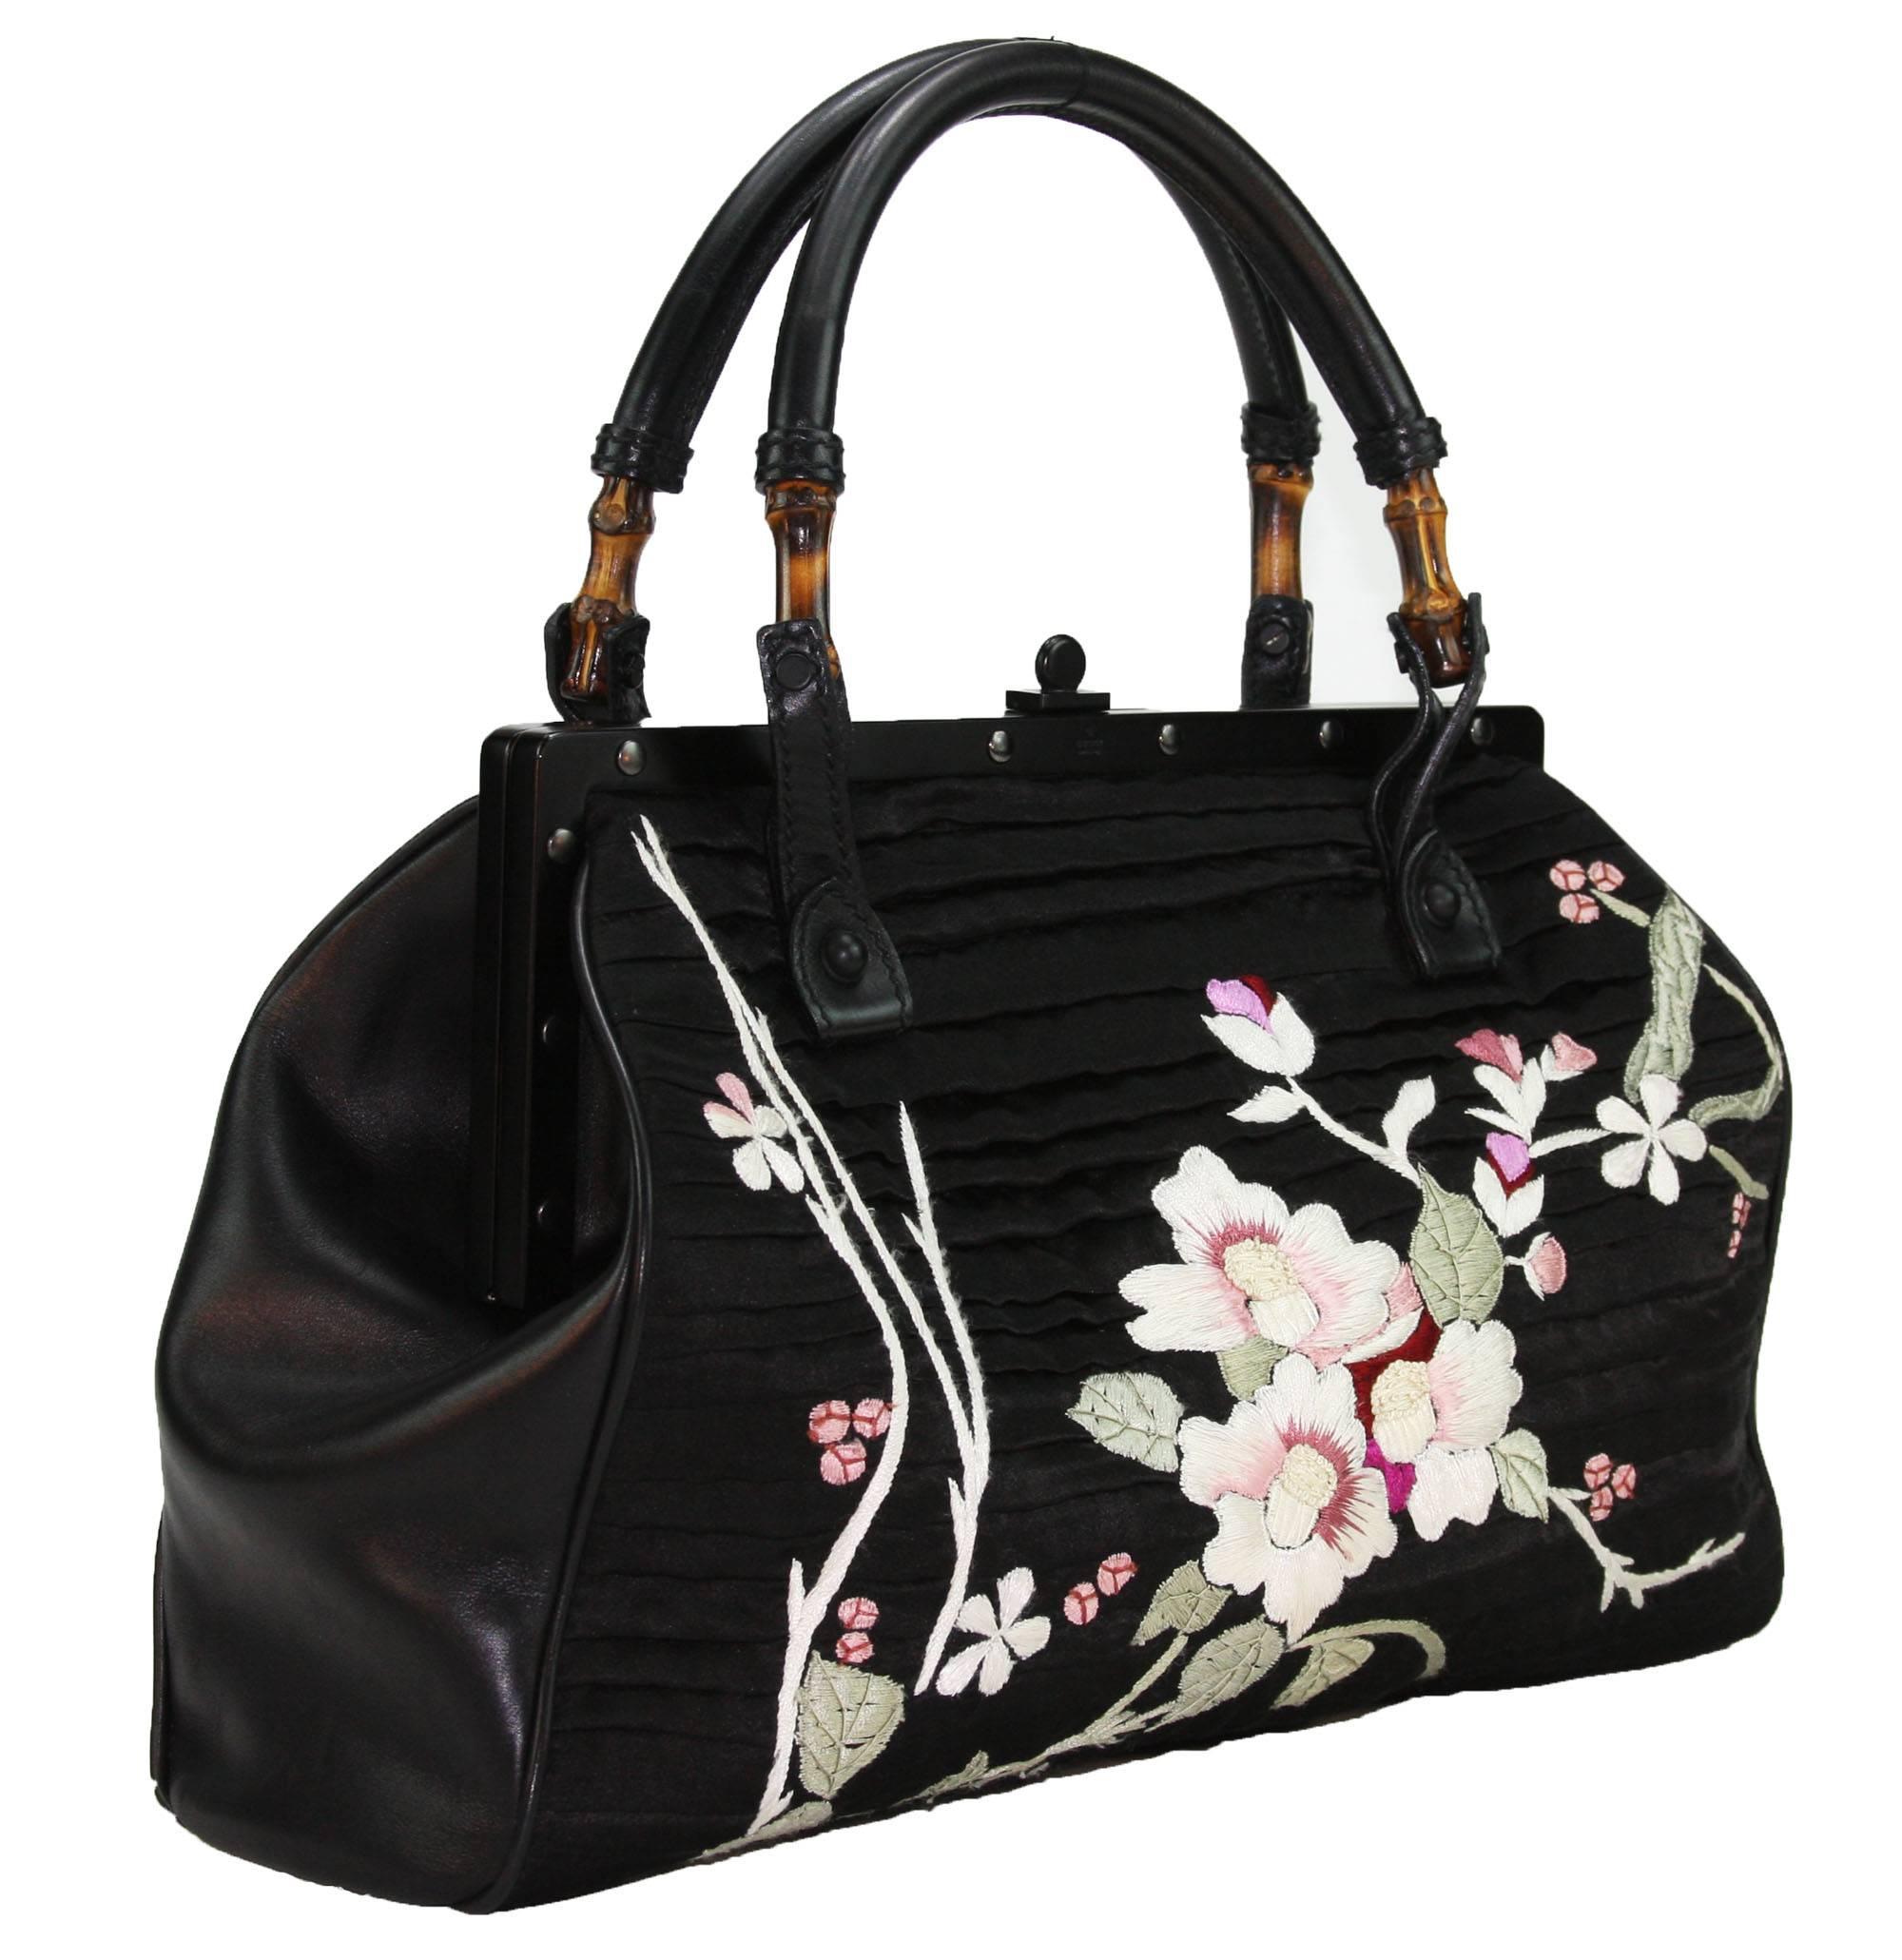 TOM FORD for GUCCI BLACK SILK FRAME JAPANISE FLOWERS BAG
S/S 2003 COLLECTION

RARE & COLLECTIBLE
COLOR – BLACK
SILK, LEATHER, BAMBOO
FLORAL JAPANISE EMBROIDERY IN WHITE, PINK, RED, GREEN ON BOTH SIDES
LEATHER SIDE PANES
FRAME-SHAPED